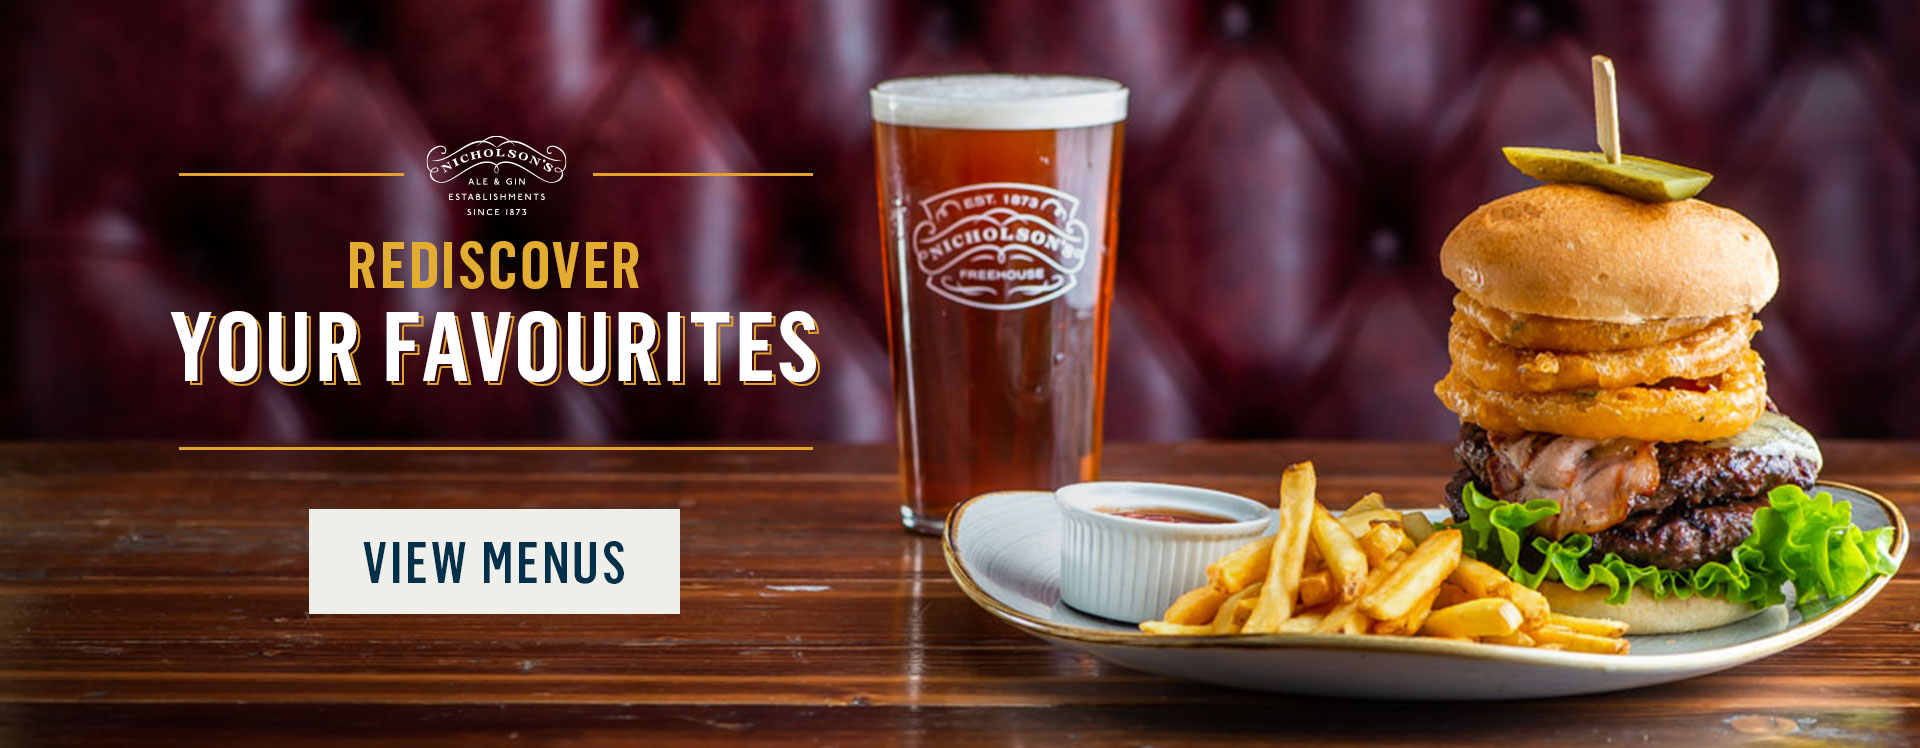 Rediscover your favourites at The King's Head